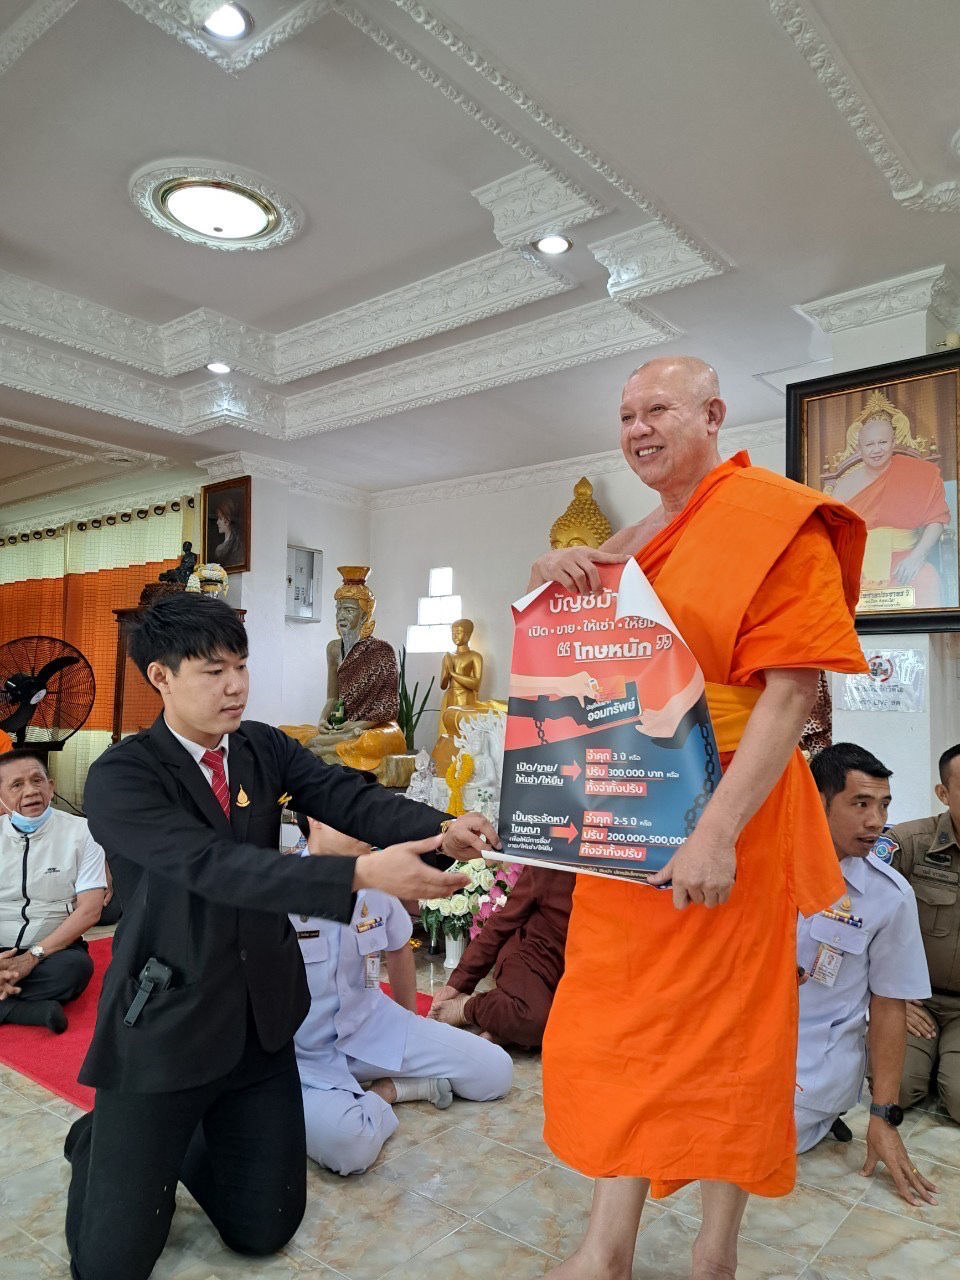 monk with financial fraud poster